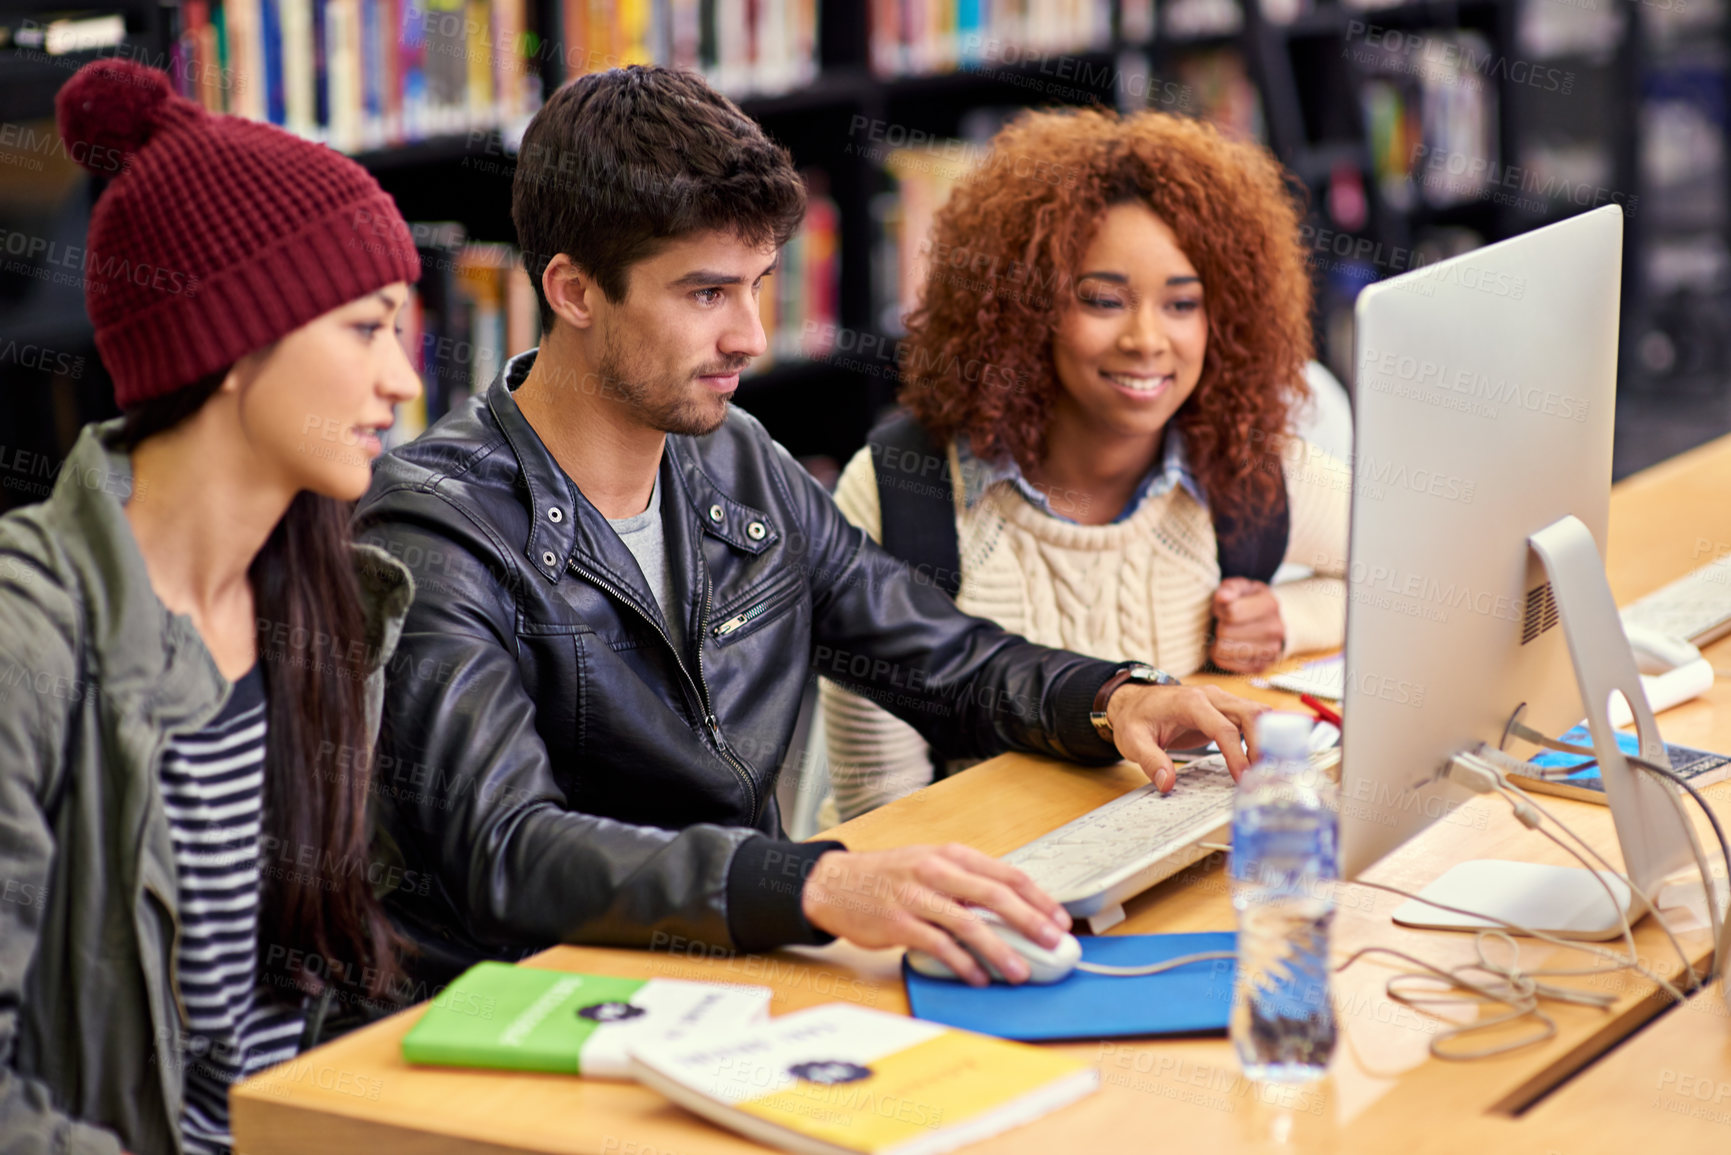 Buy stock photo Shot of a group of students working together at a computer in a university library